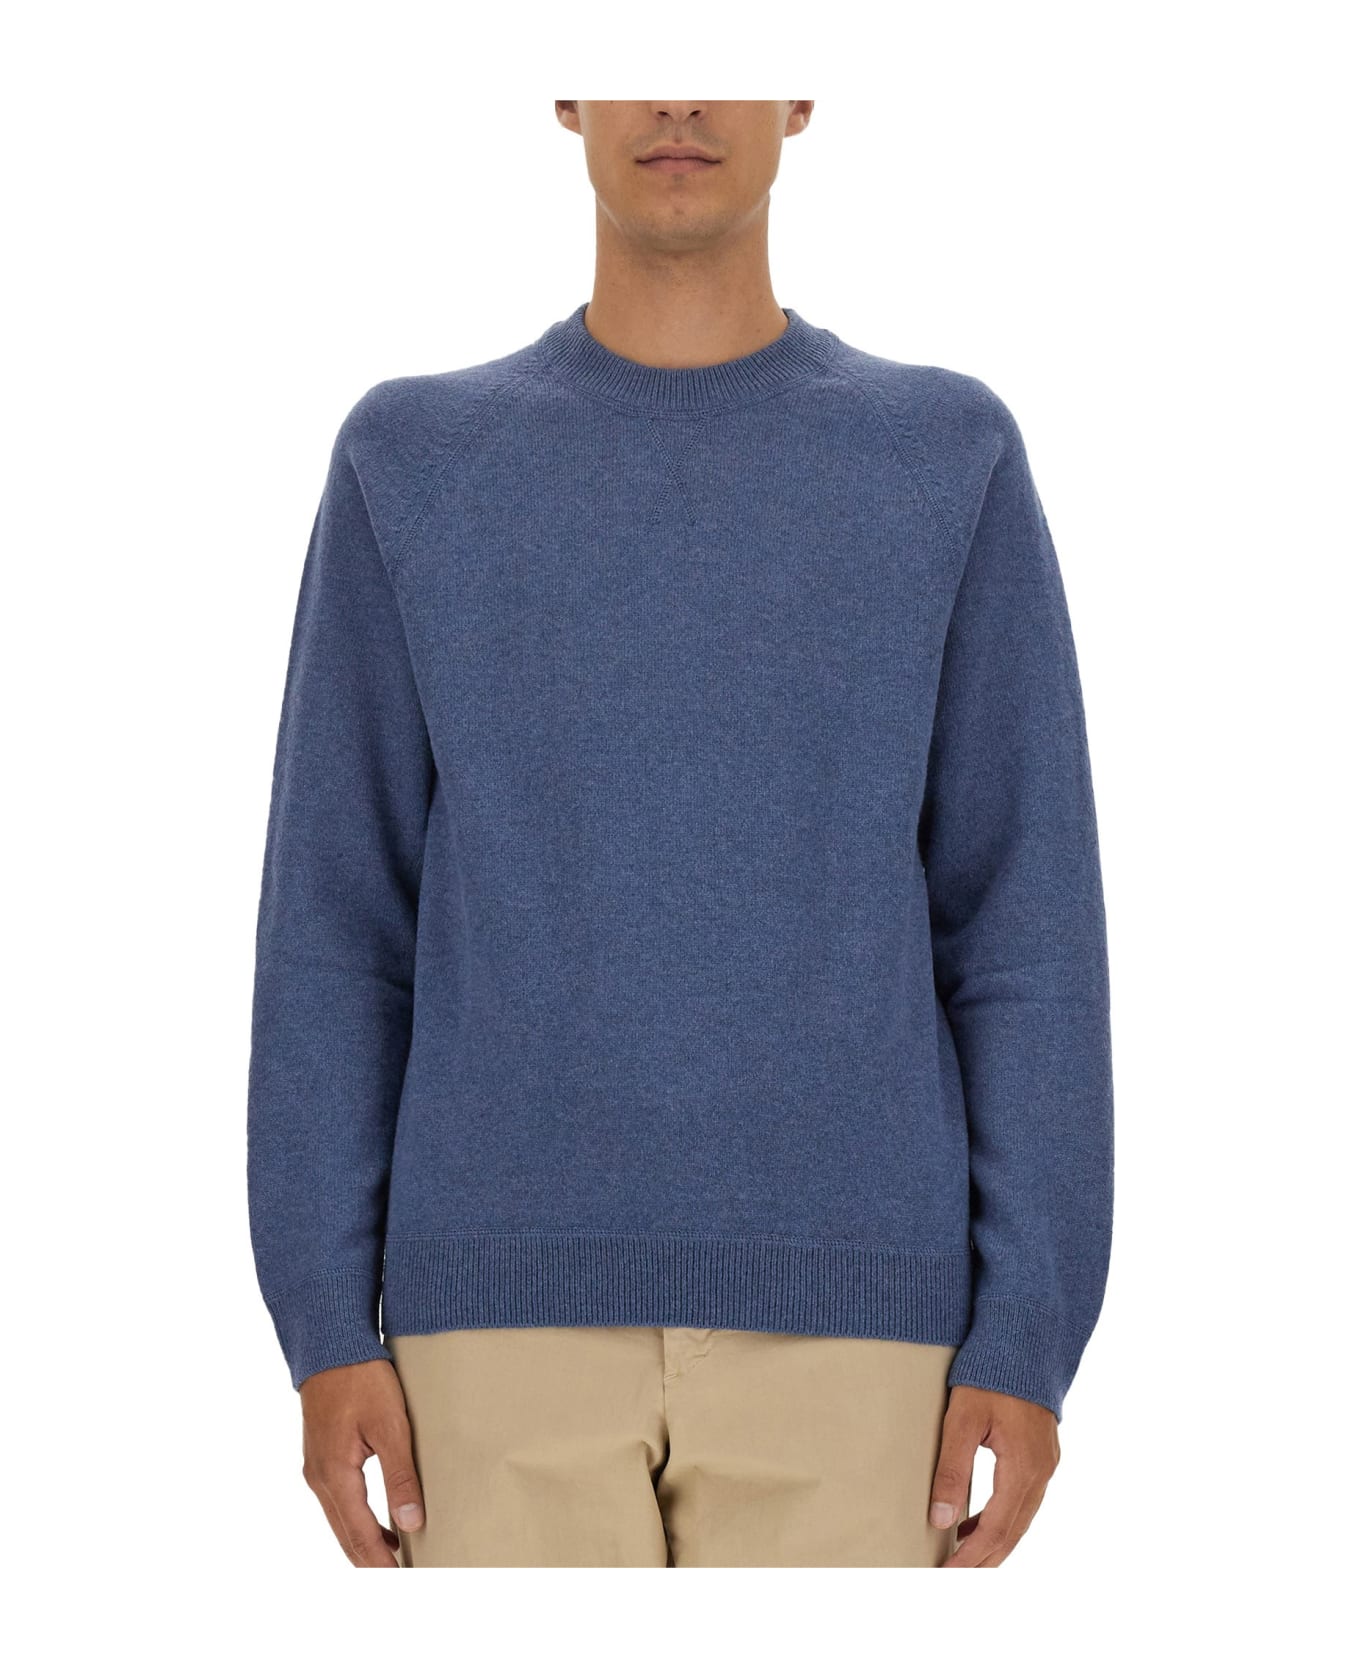 PS by Paul Smith Wool Jersey. Sweater - GREYISH BLUE